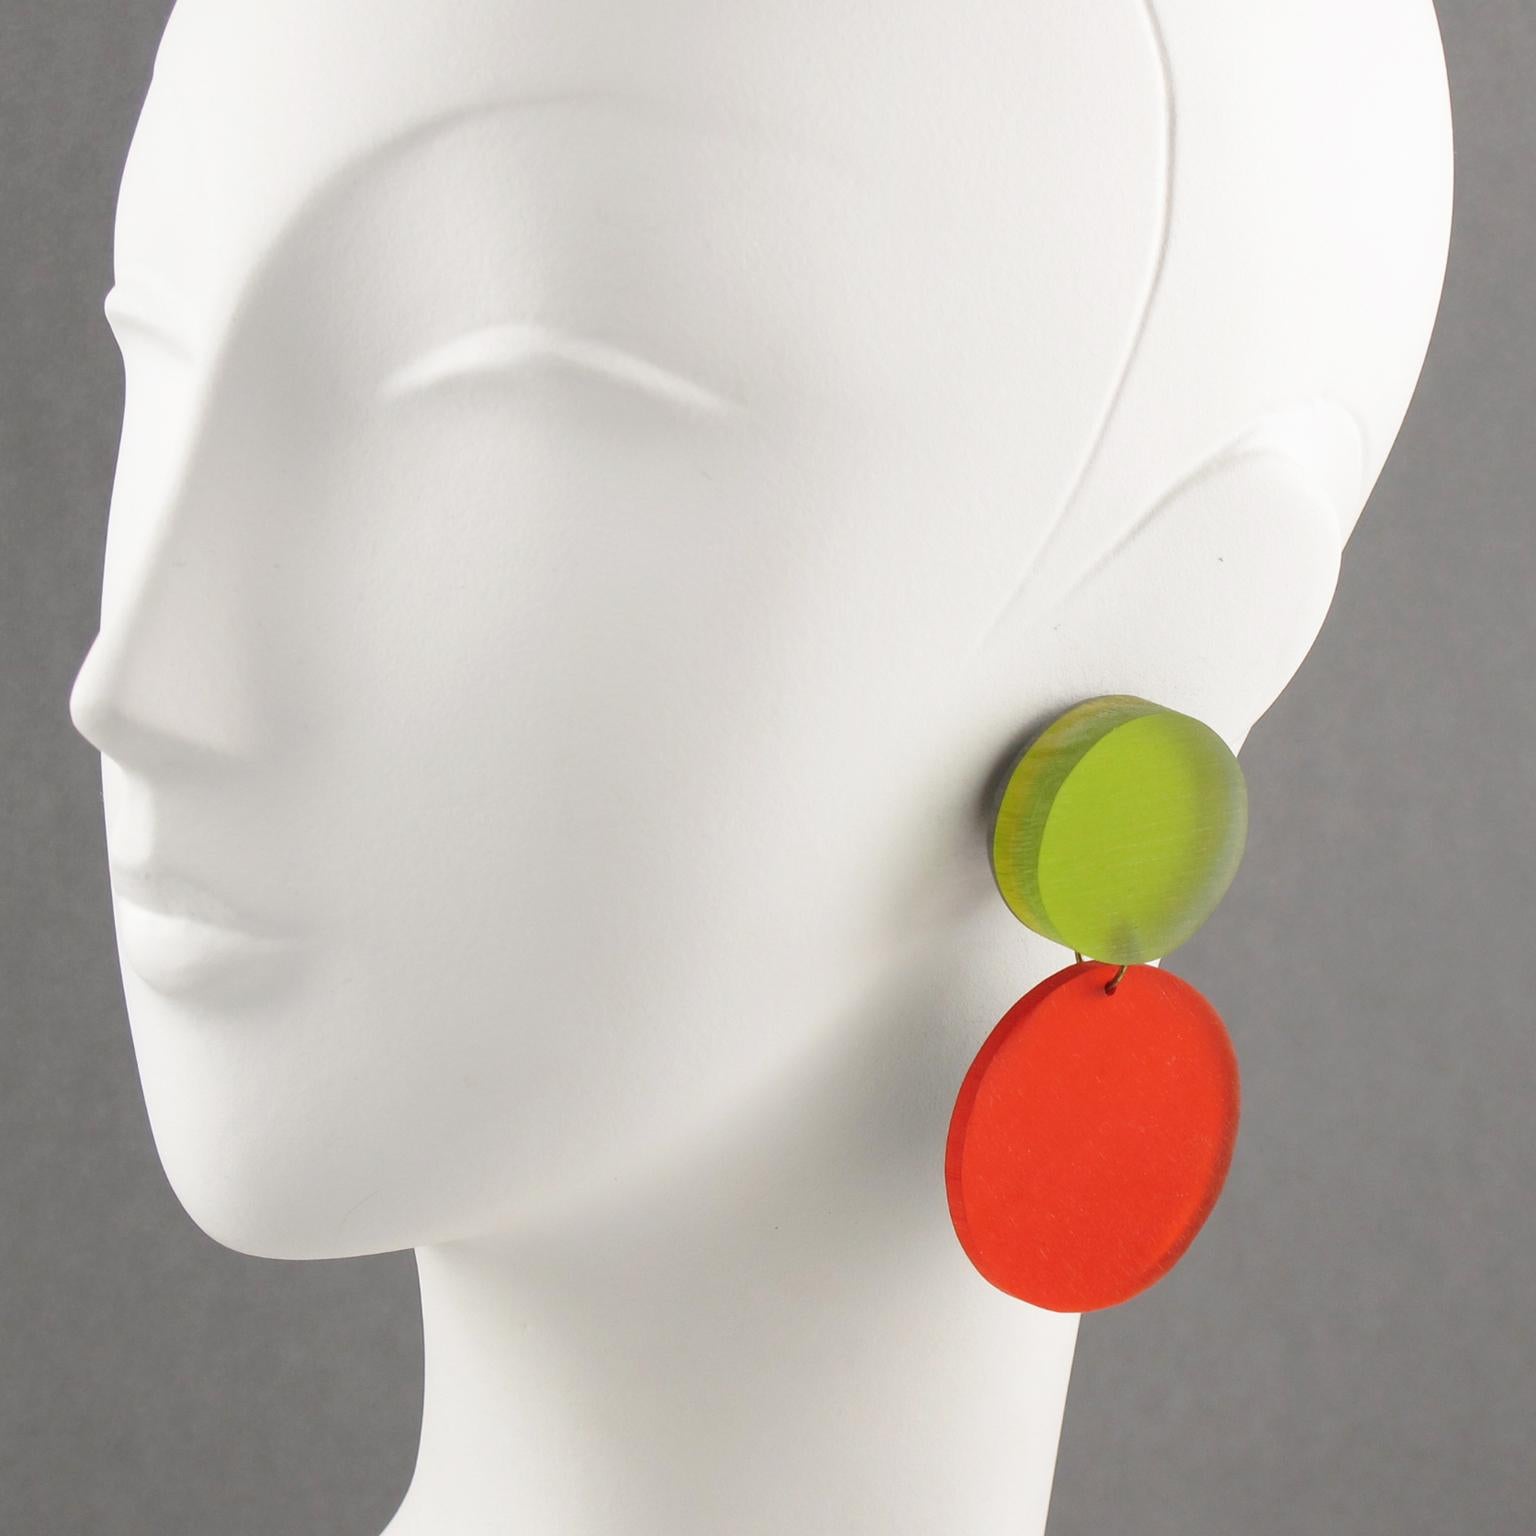 Stunning oversized Lucite dangling chandelier clip-on earrings designed by Harriet Bauknight for Kaso. Large geometric rounded shape, using frosted Lucite in assorted colors of apple green and pumpkin red. The Kaso paper sticker was removed, but the